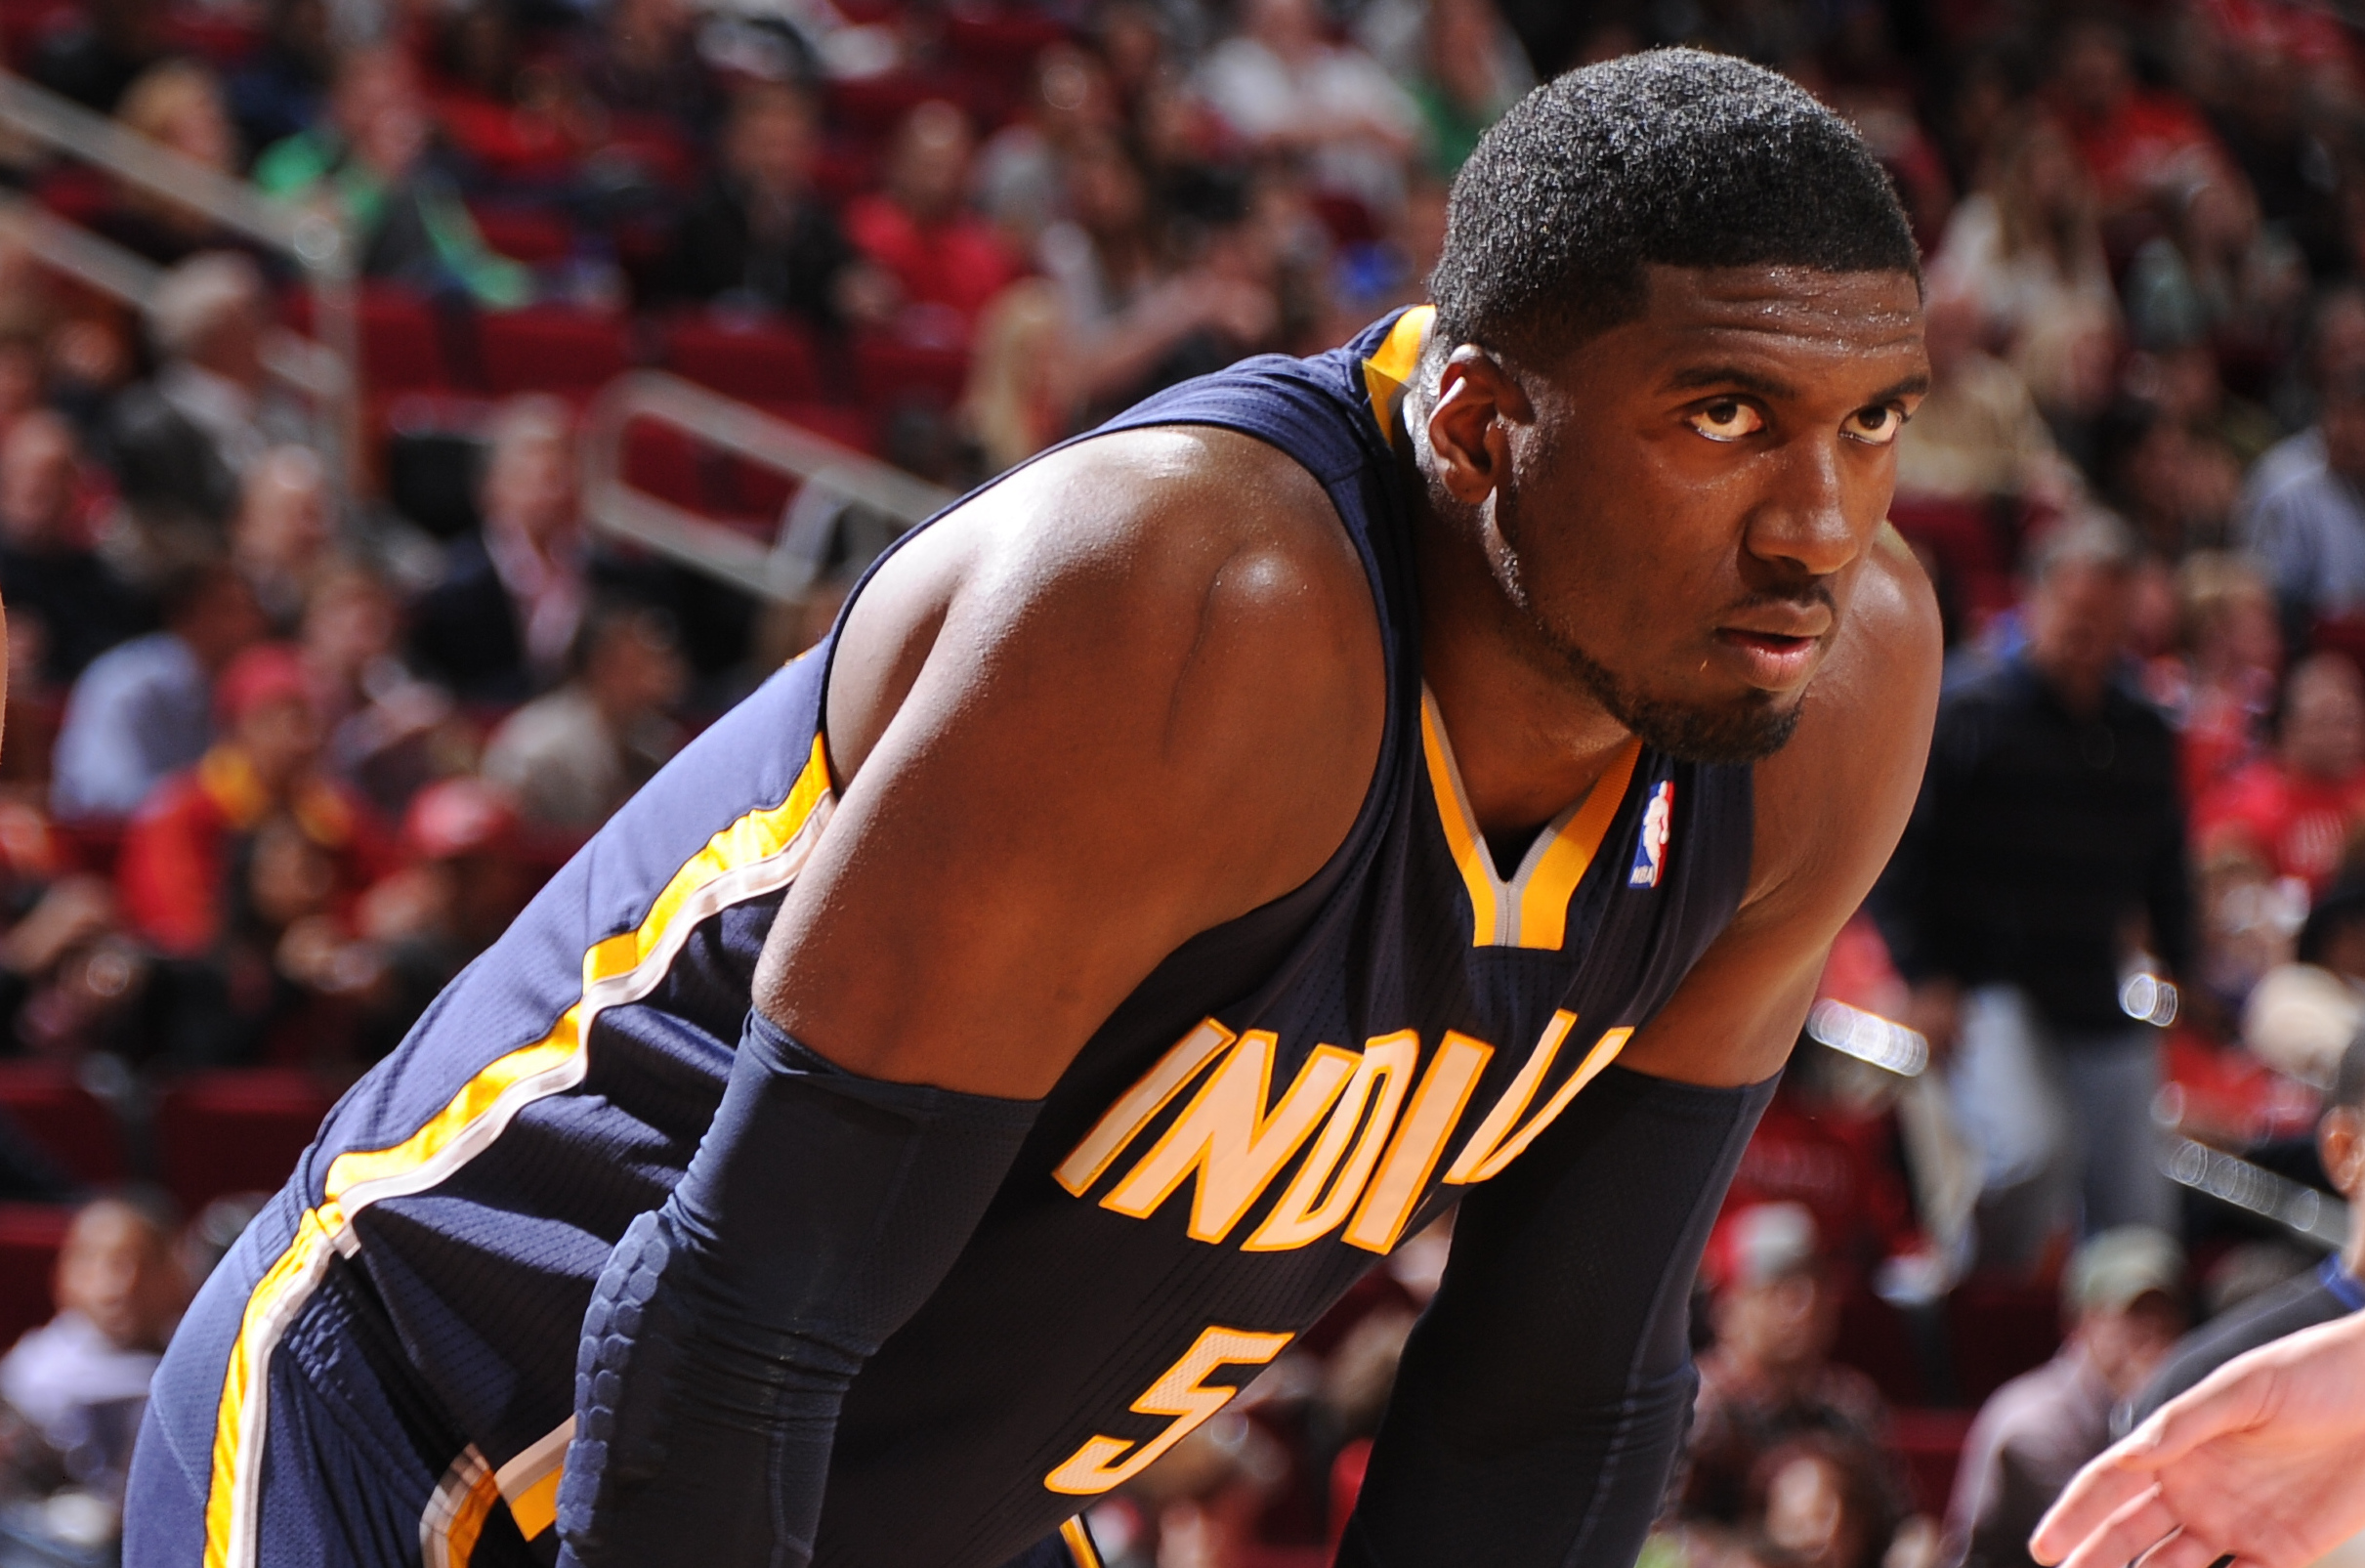 Roy Hibbert may not have Defensive Player of the Year locked up